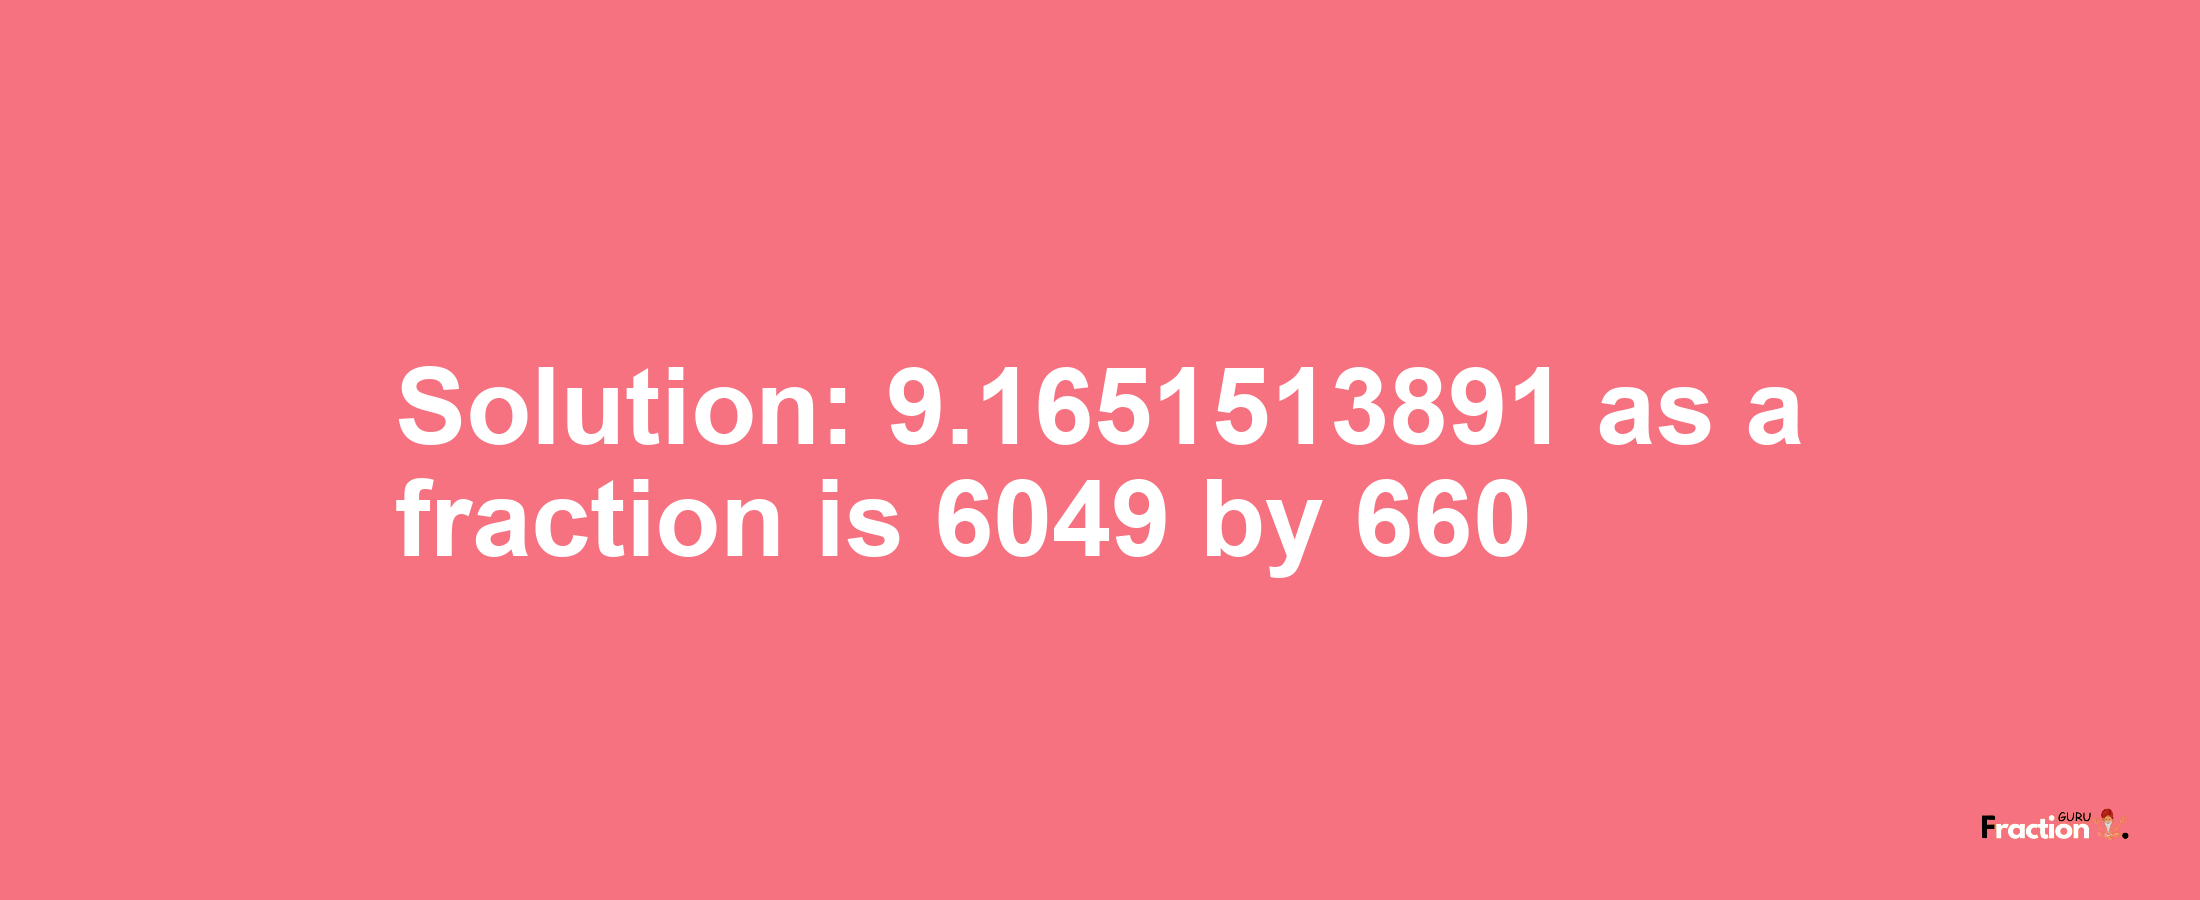 Solution:9.1651513891 as a fraction is 6049/660